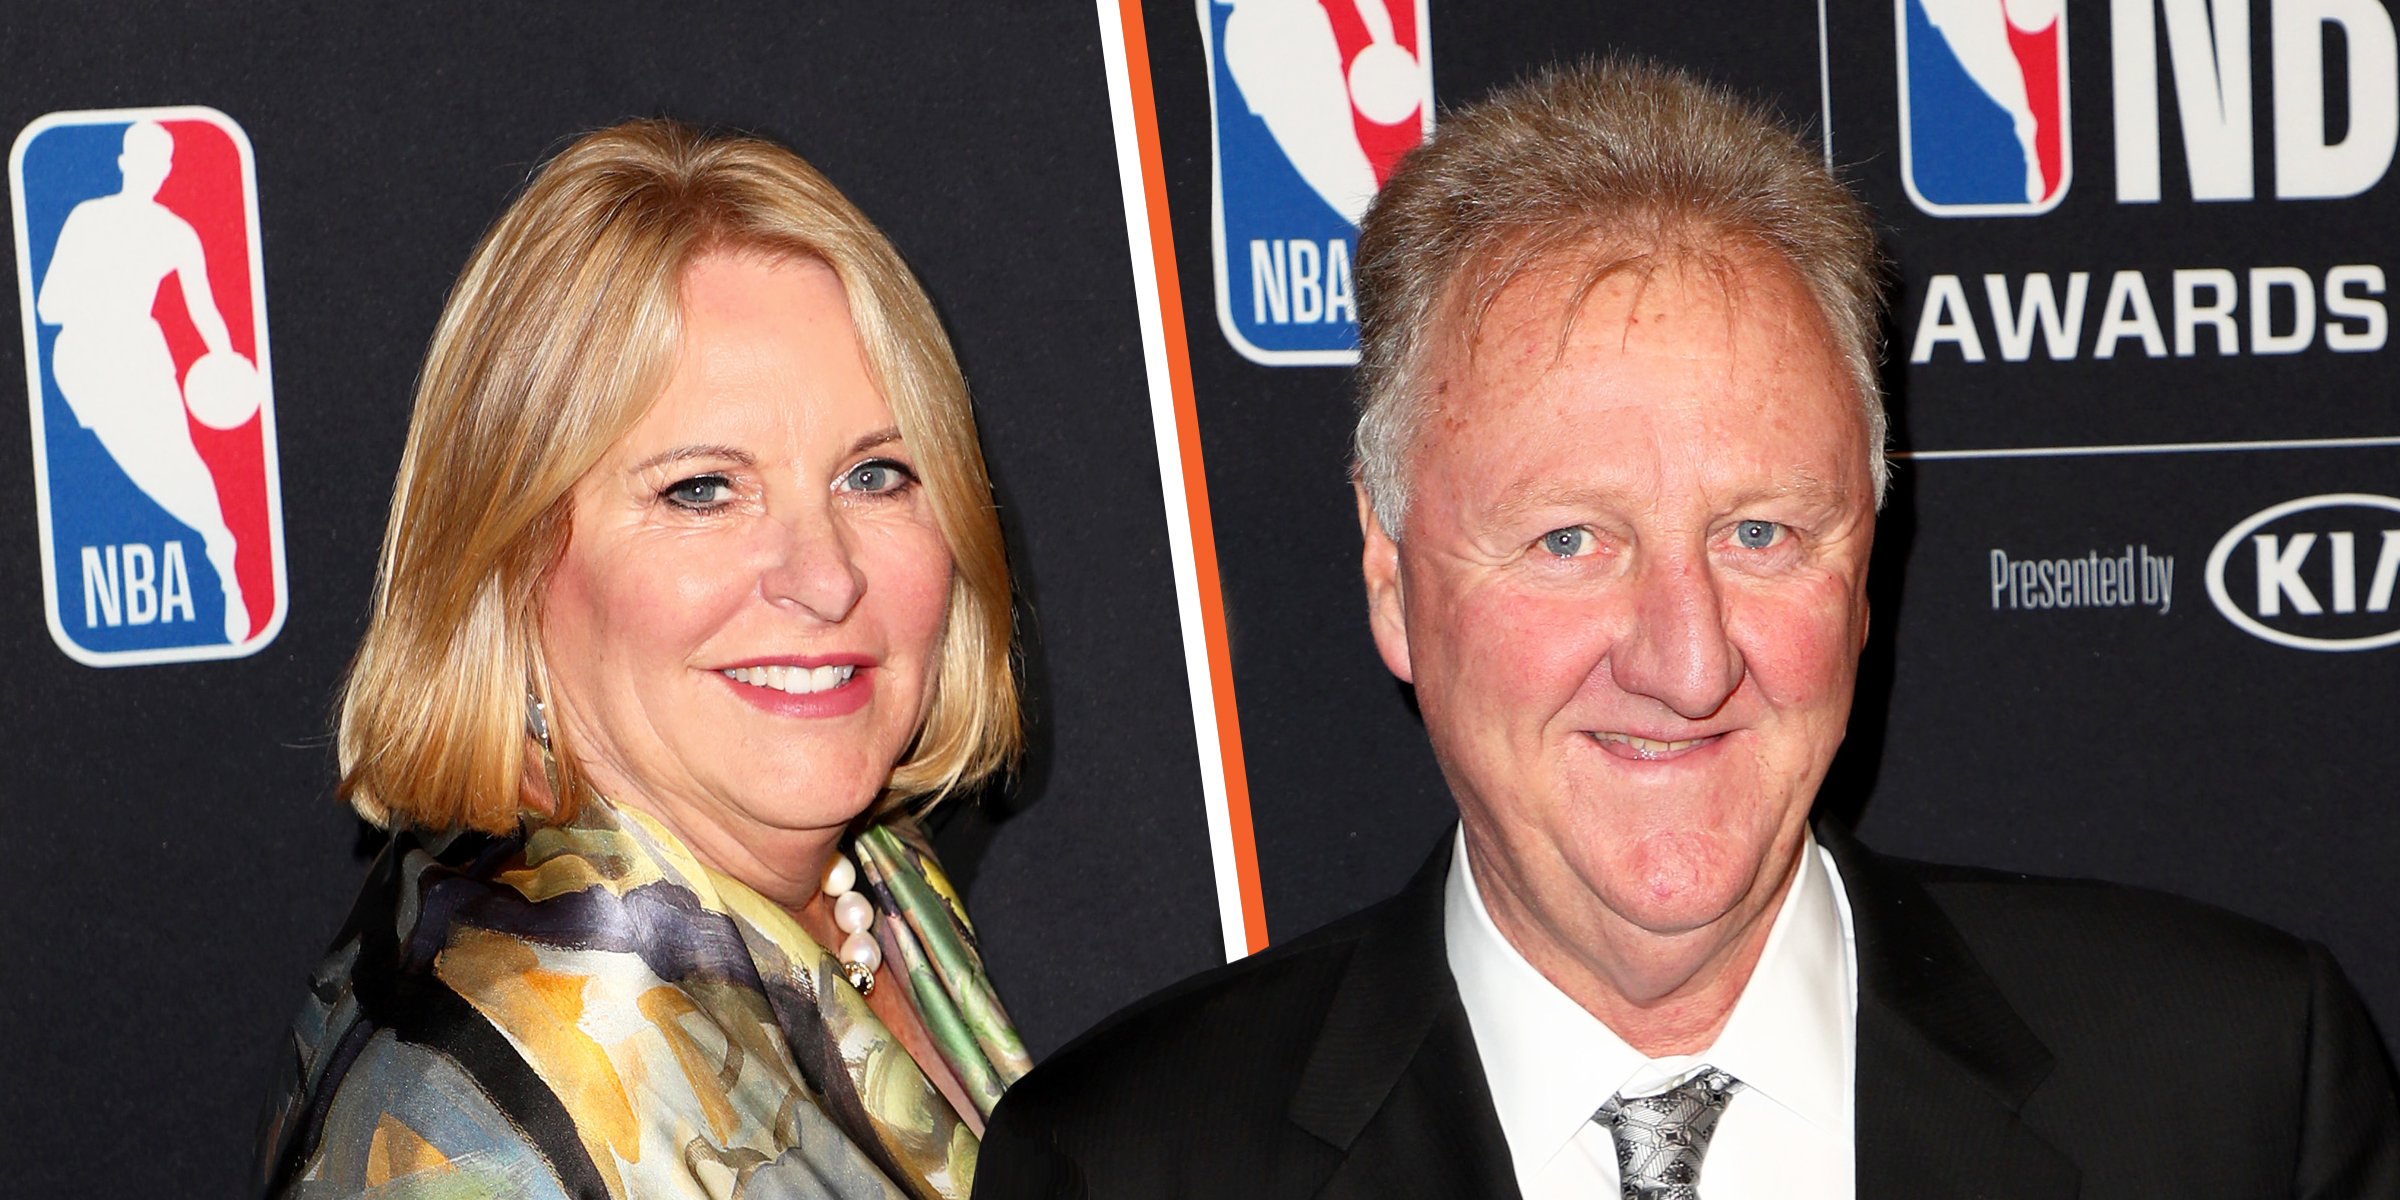 Dina Mattingly and Larry Bird, 2019 | Source: Getty Images